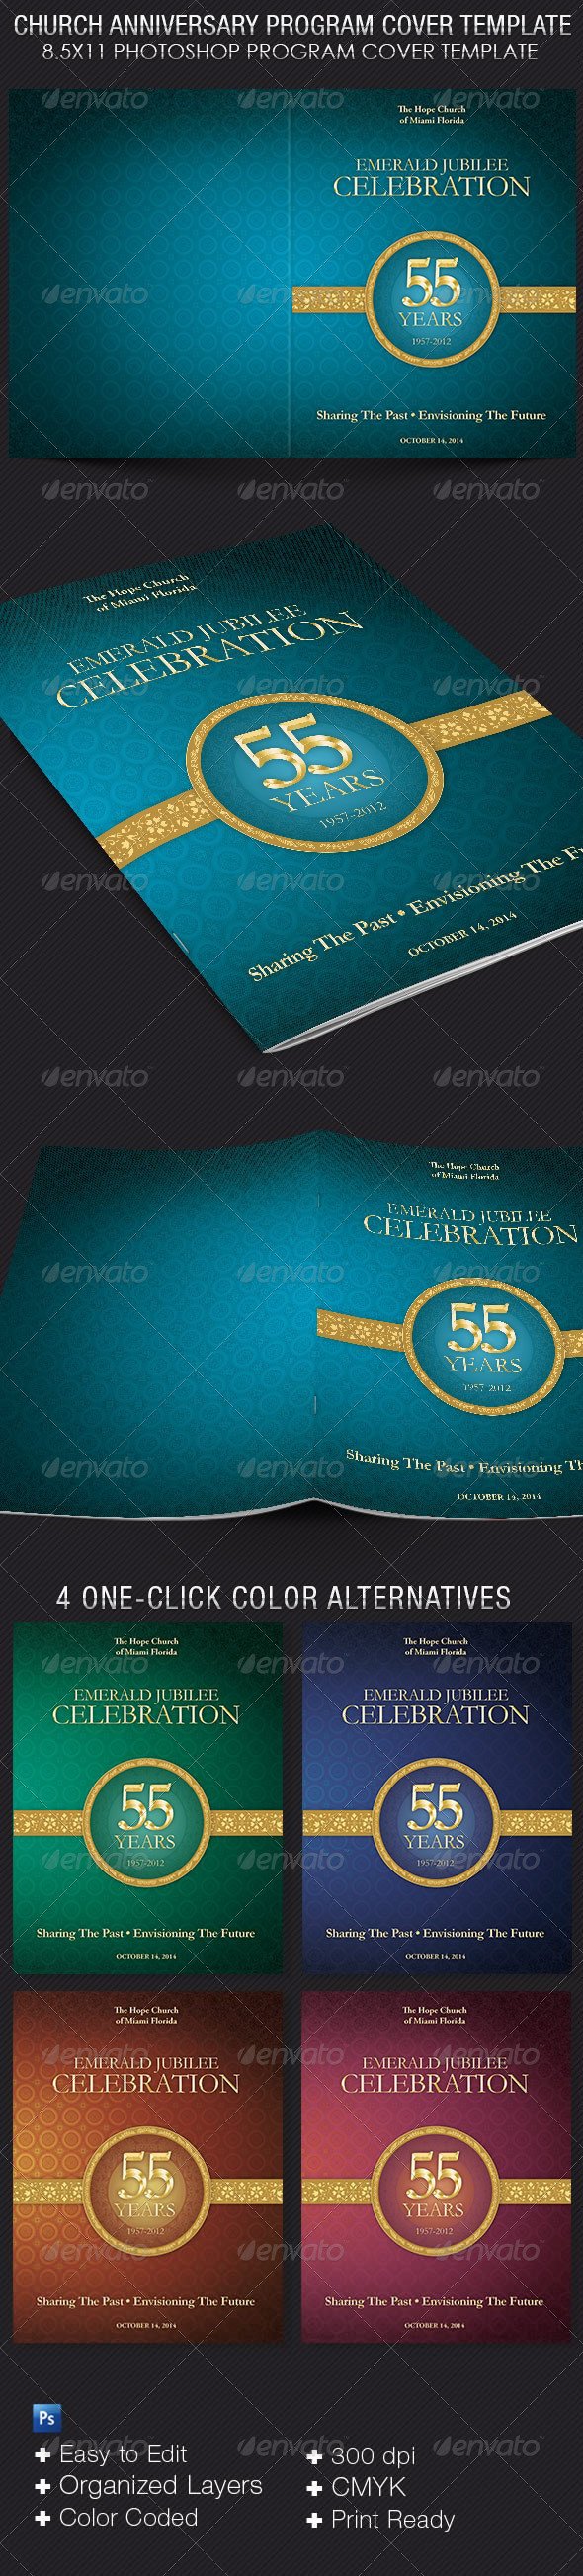 Church Anniversary Program Cover Template by 4cgraphic